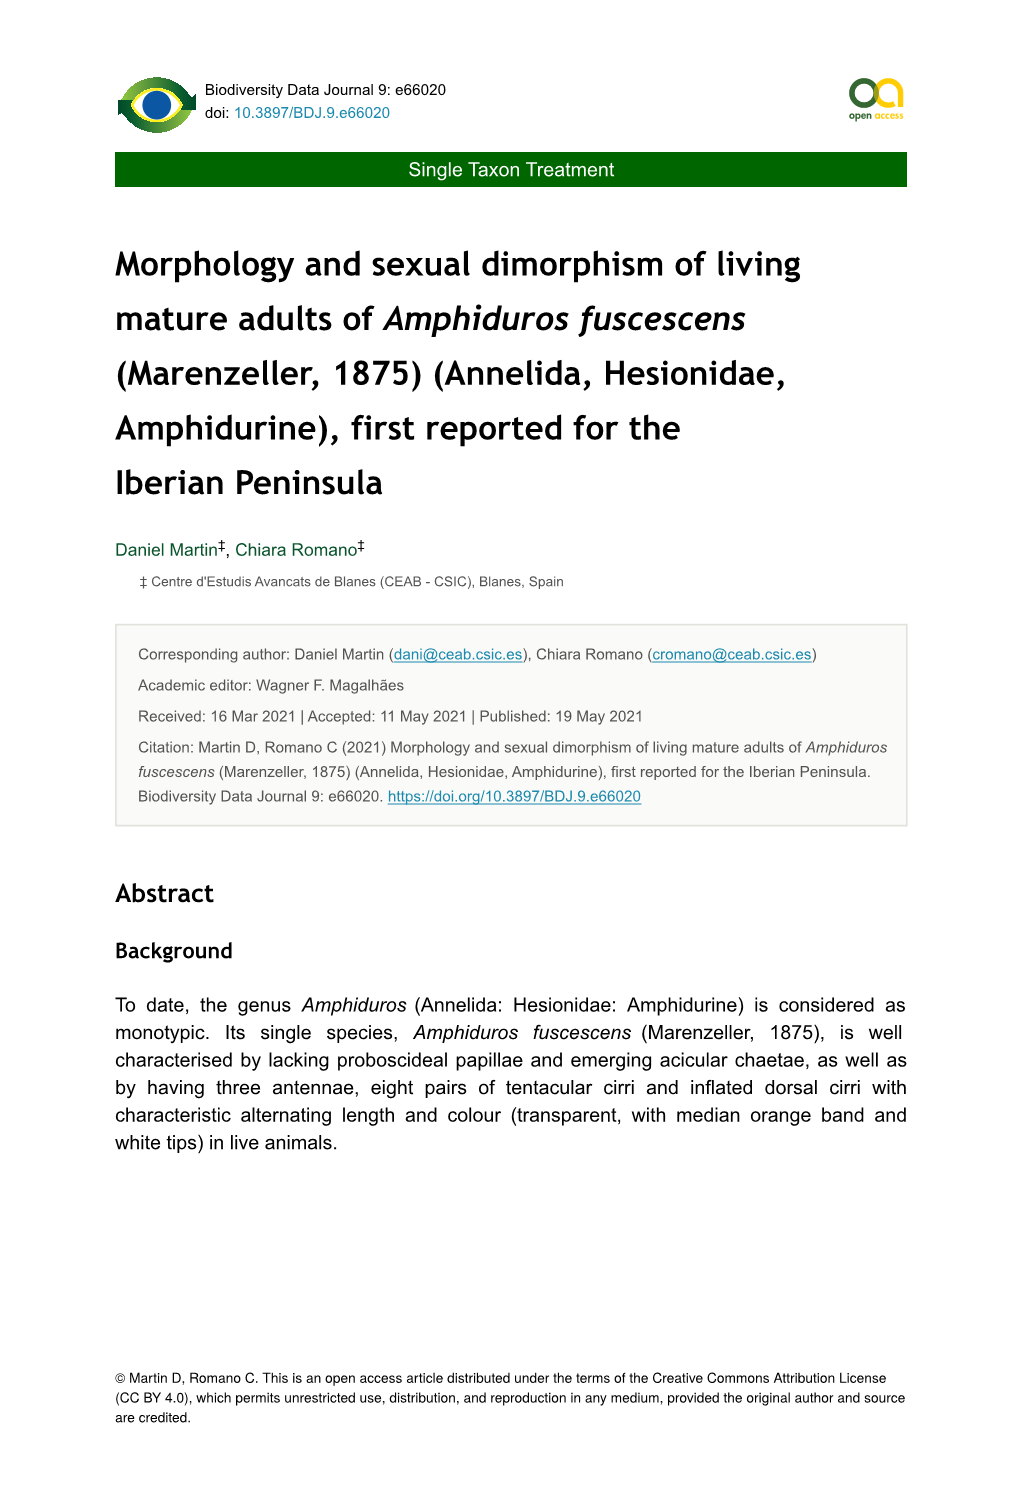 Morphology and Sexual Dimorphism of Living